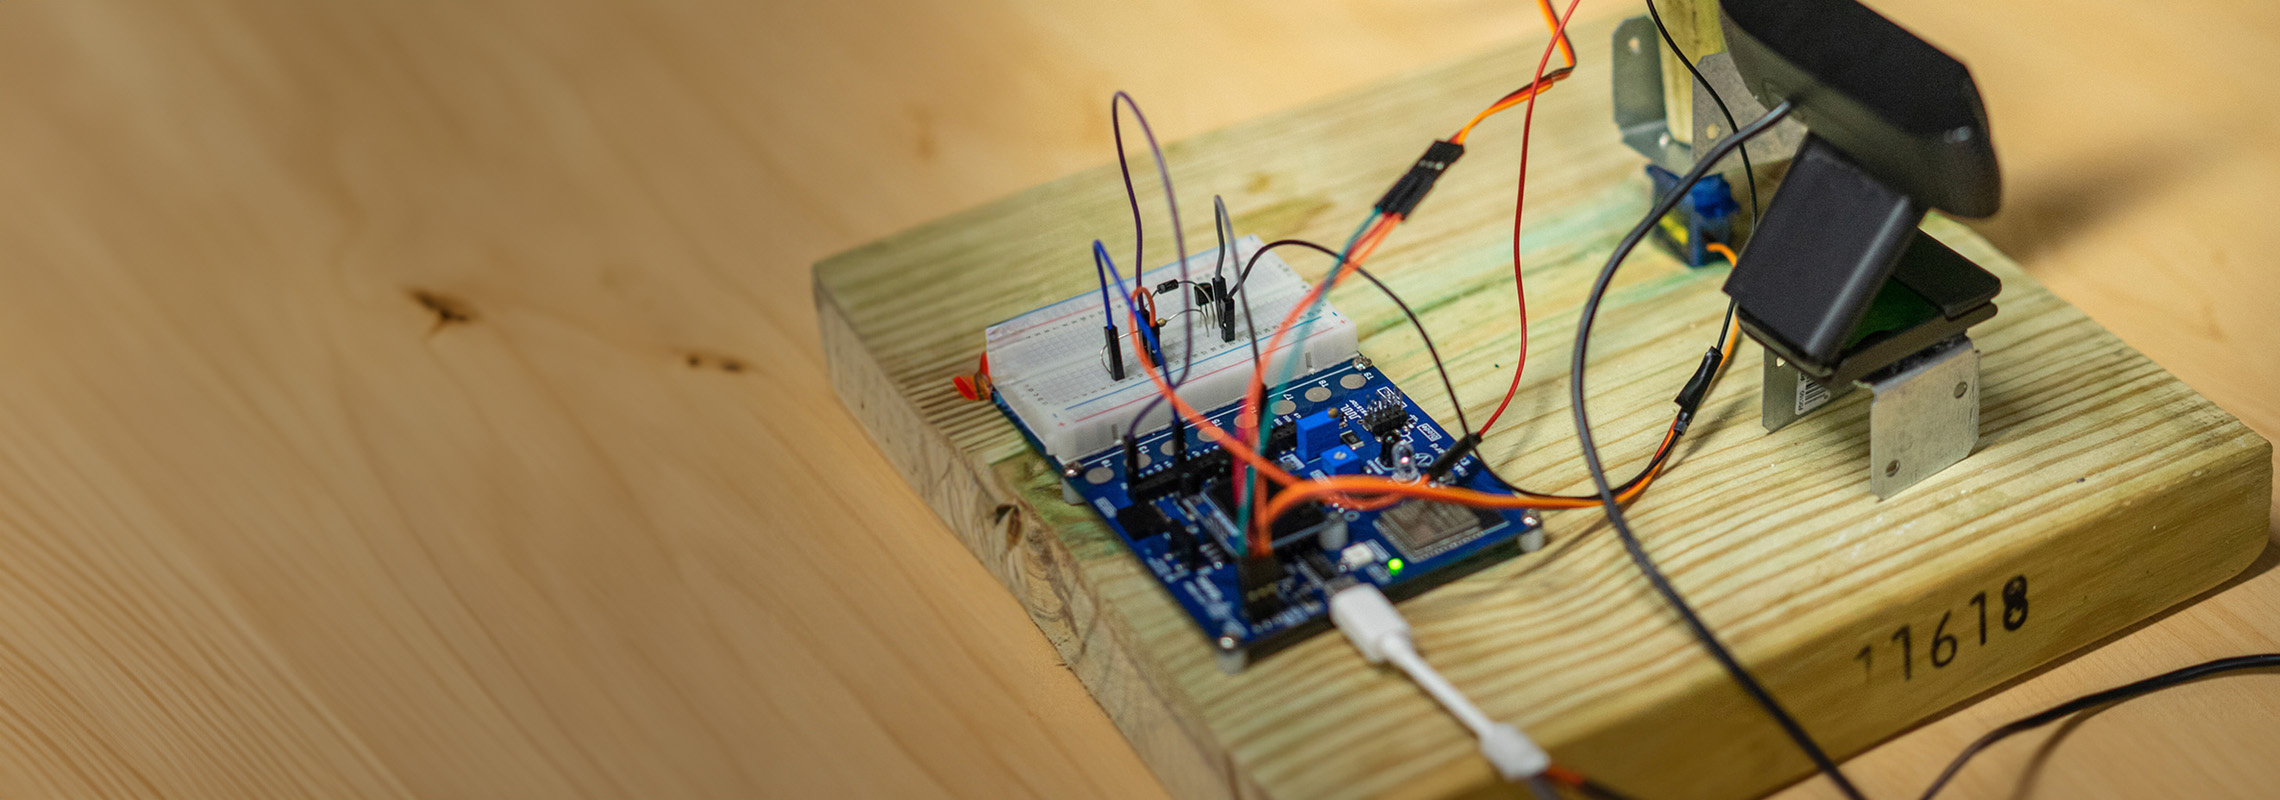 Make project: Microcontroller with wires hooked up to display 